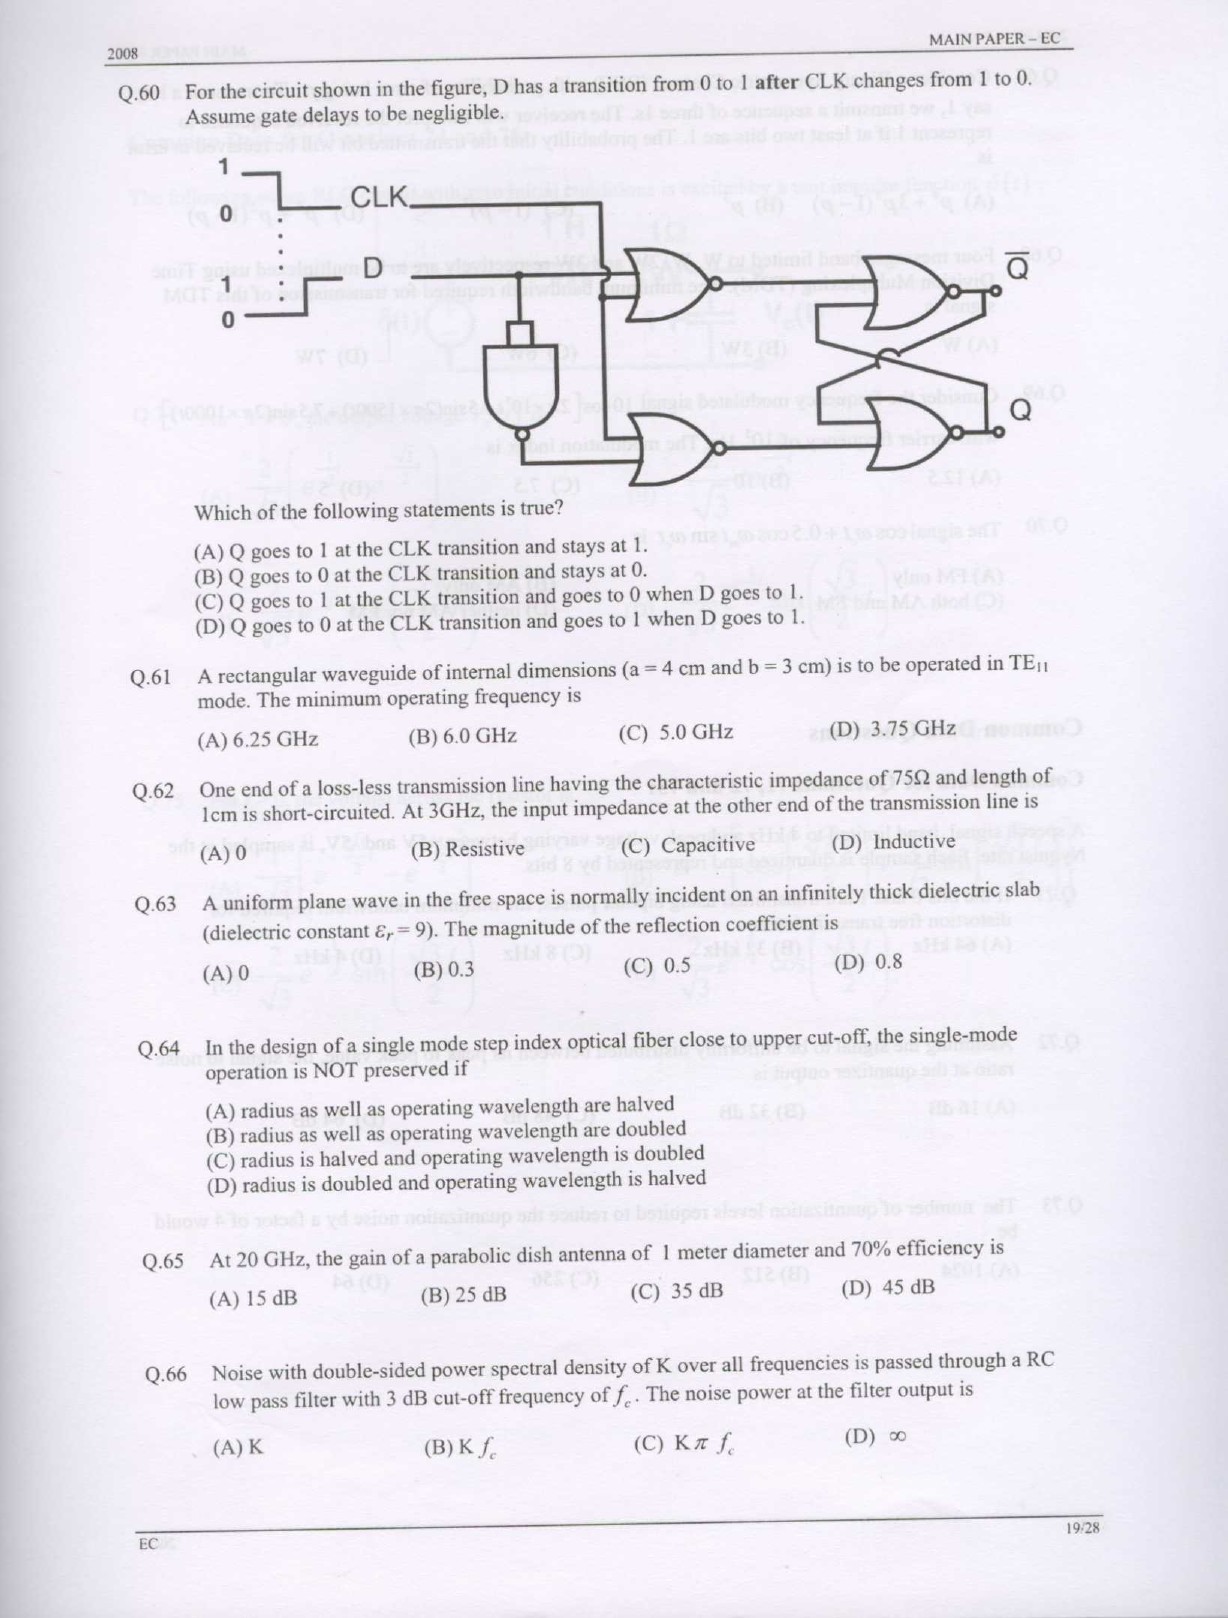 GATE Exam Question Paper 2008 Electronics and Communication Engineering 19